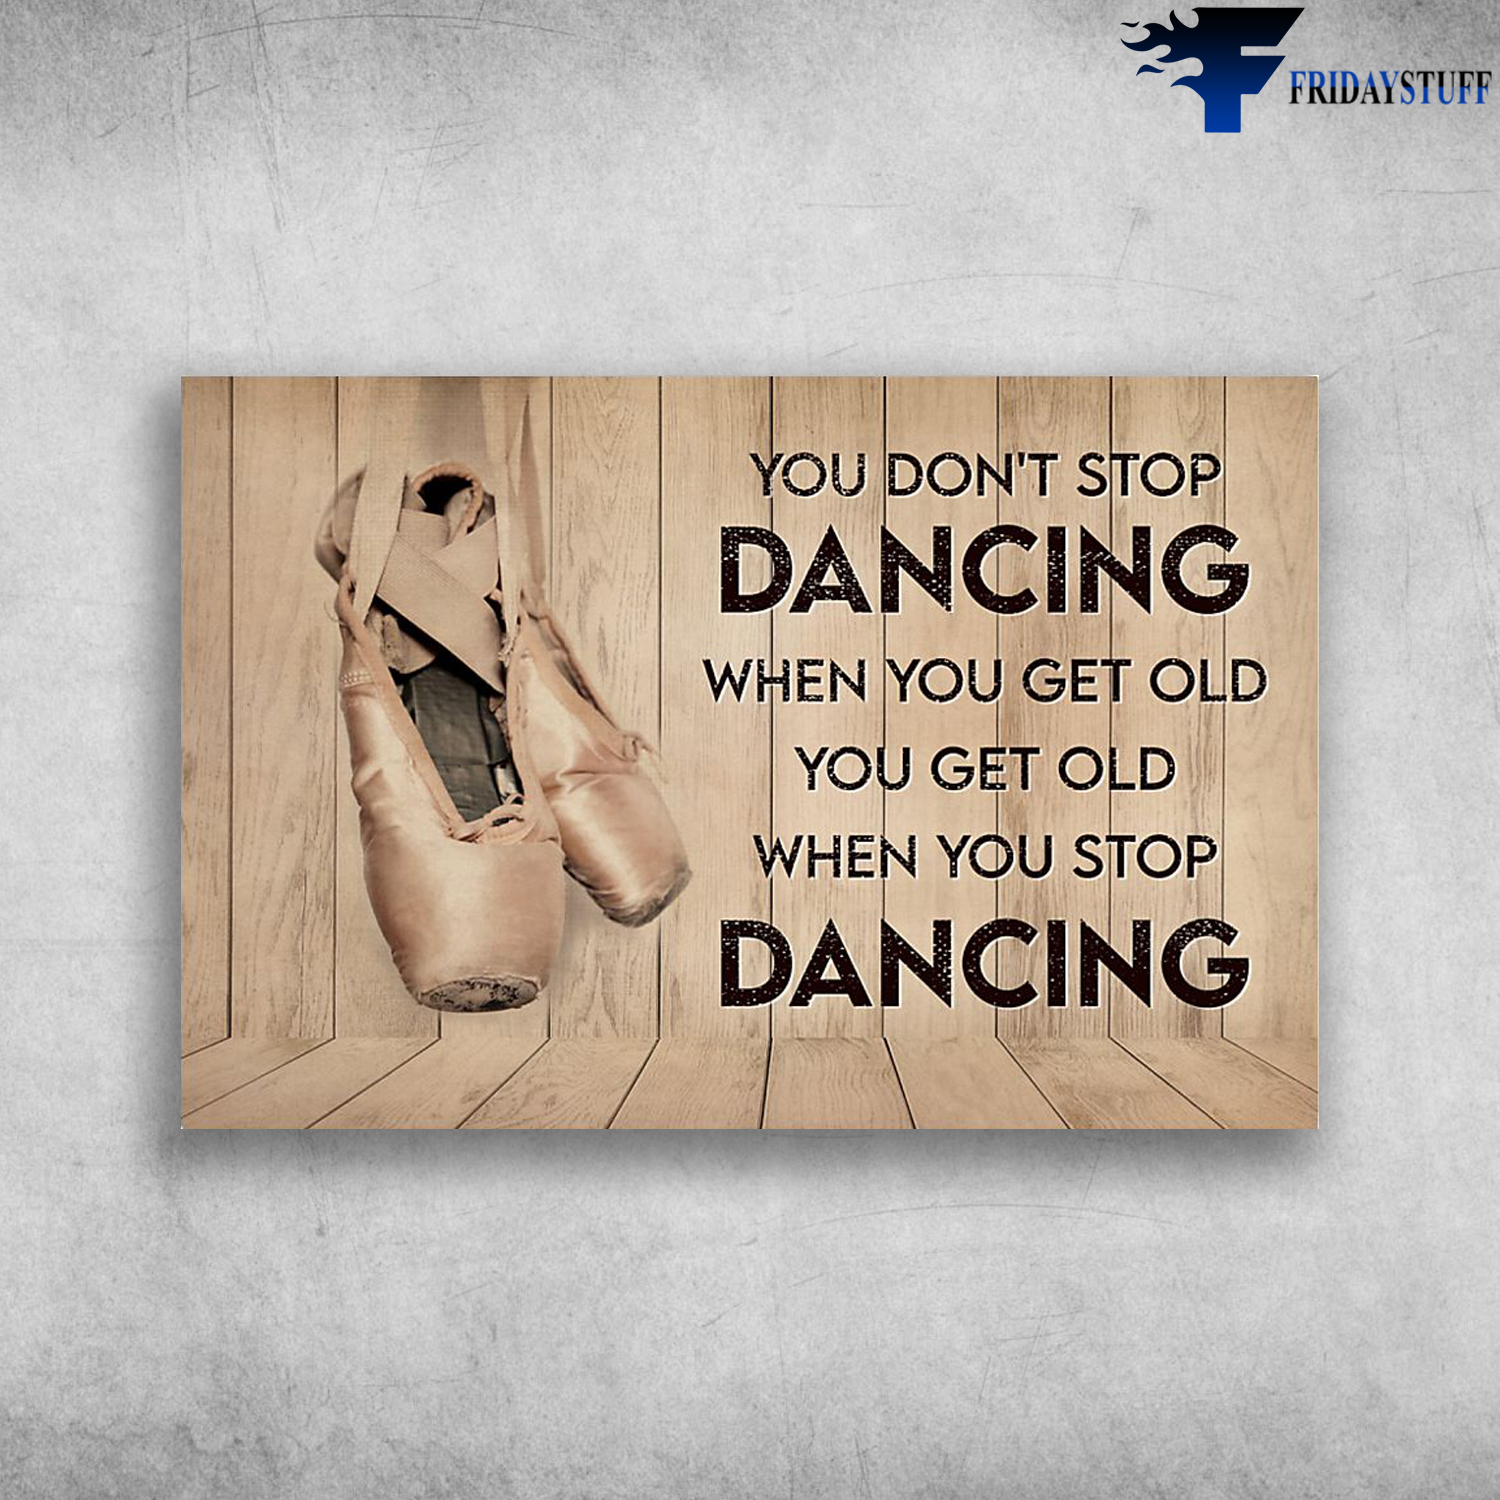 Ballet Shoes - You Don't Stop Dancing When You Get Old, You Get Old When You Stop Dancing